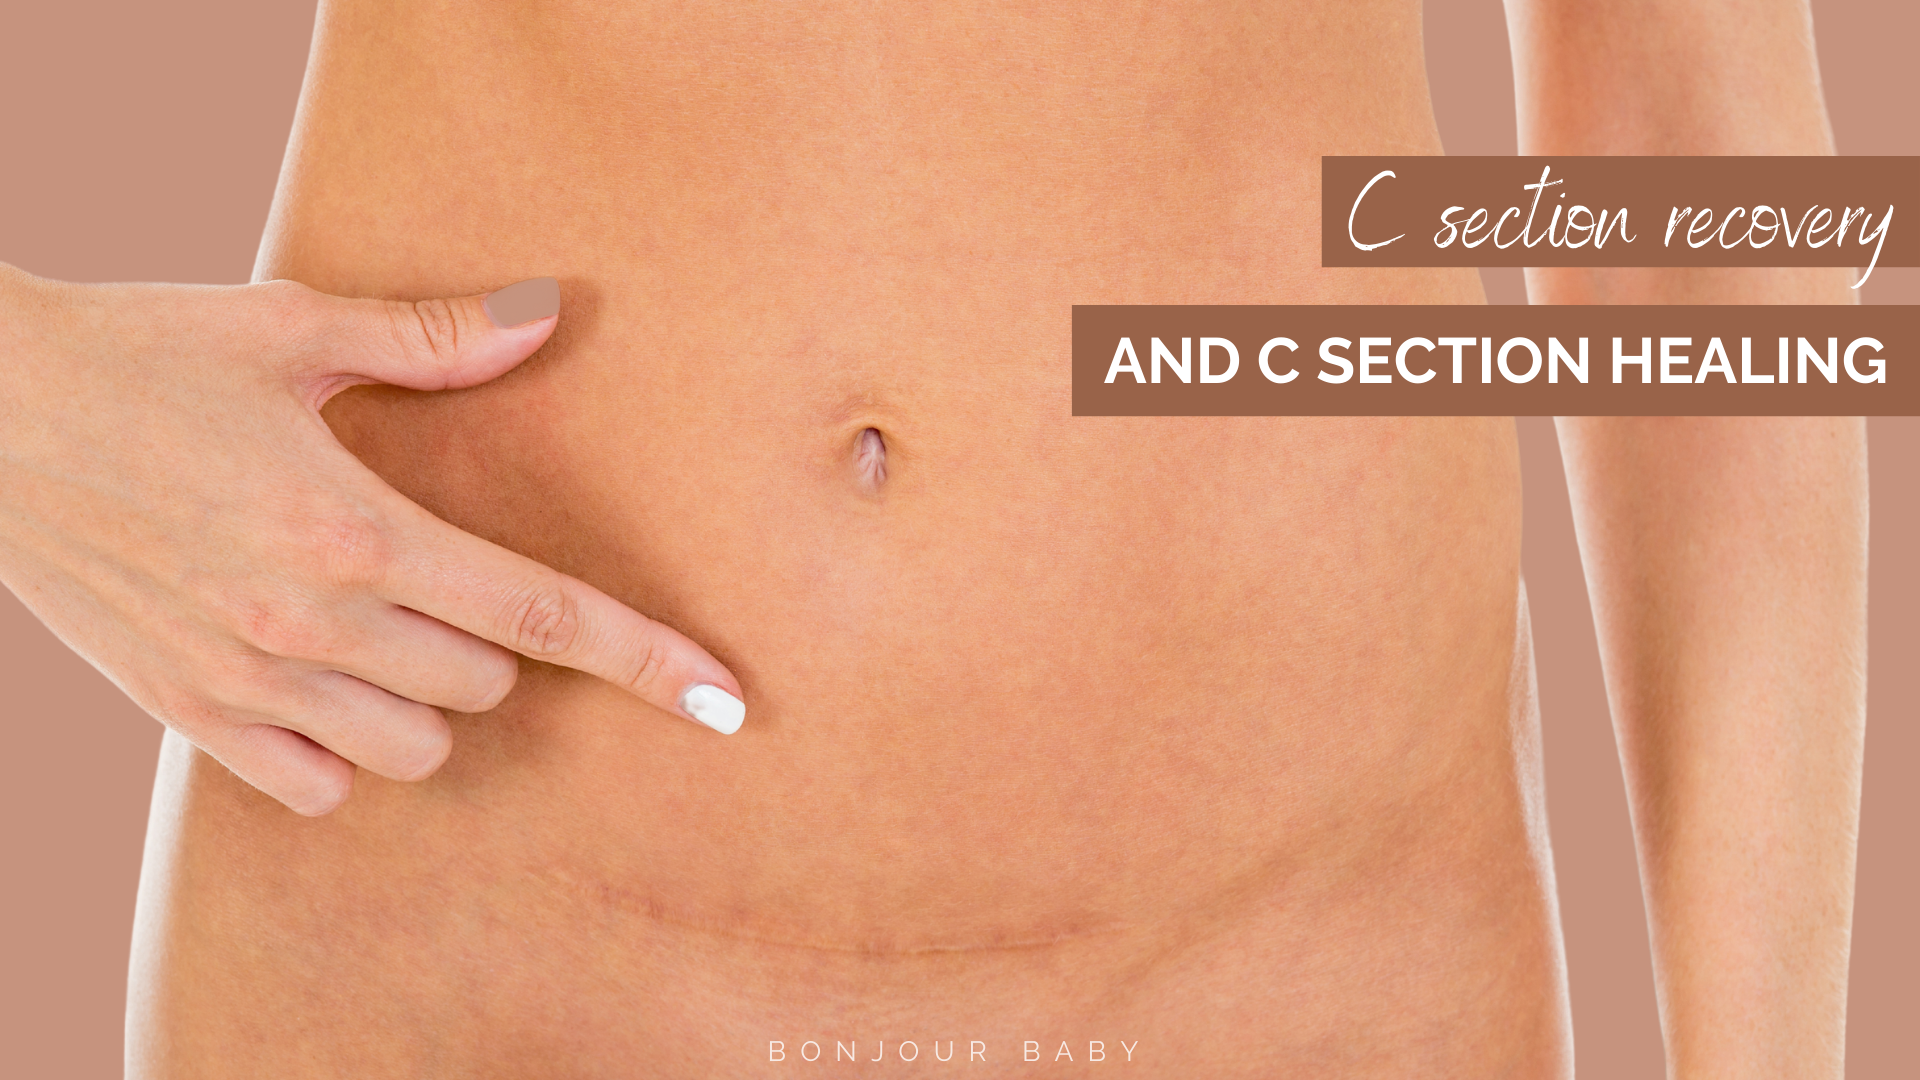 C-section recovery – Pregnancy Info